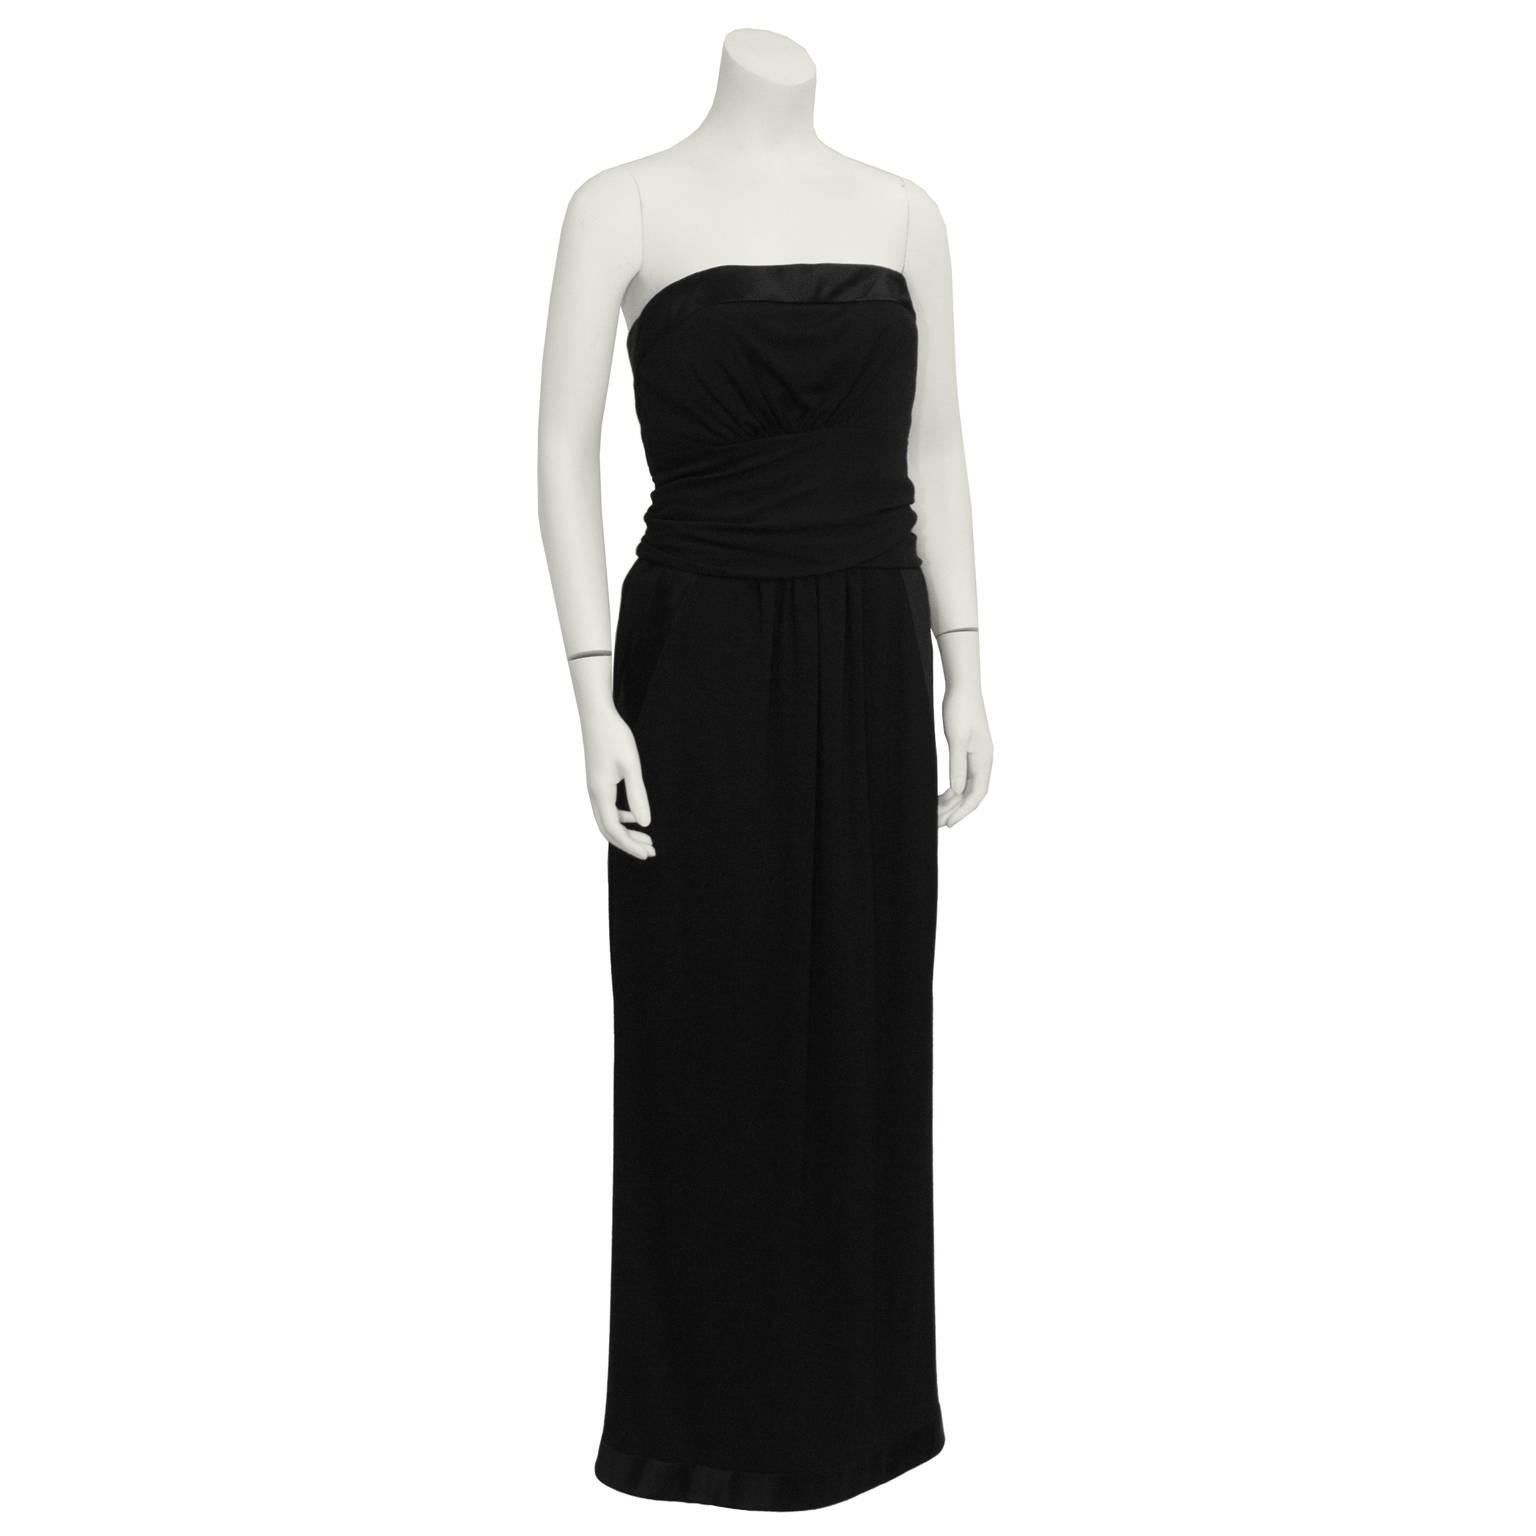 1980's Chanel black strapless gown. Features silk satin band around the top and the hemline. Belted around waist, with slight gathering on bodice and skirt. Side slash pockets. Back of the column skirt has three vertical buttons on the bottom.